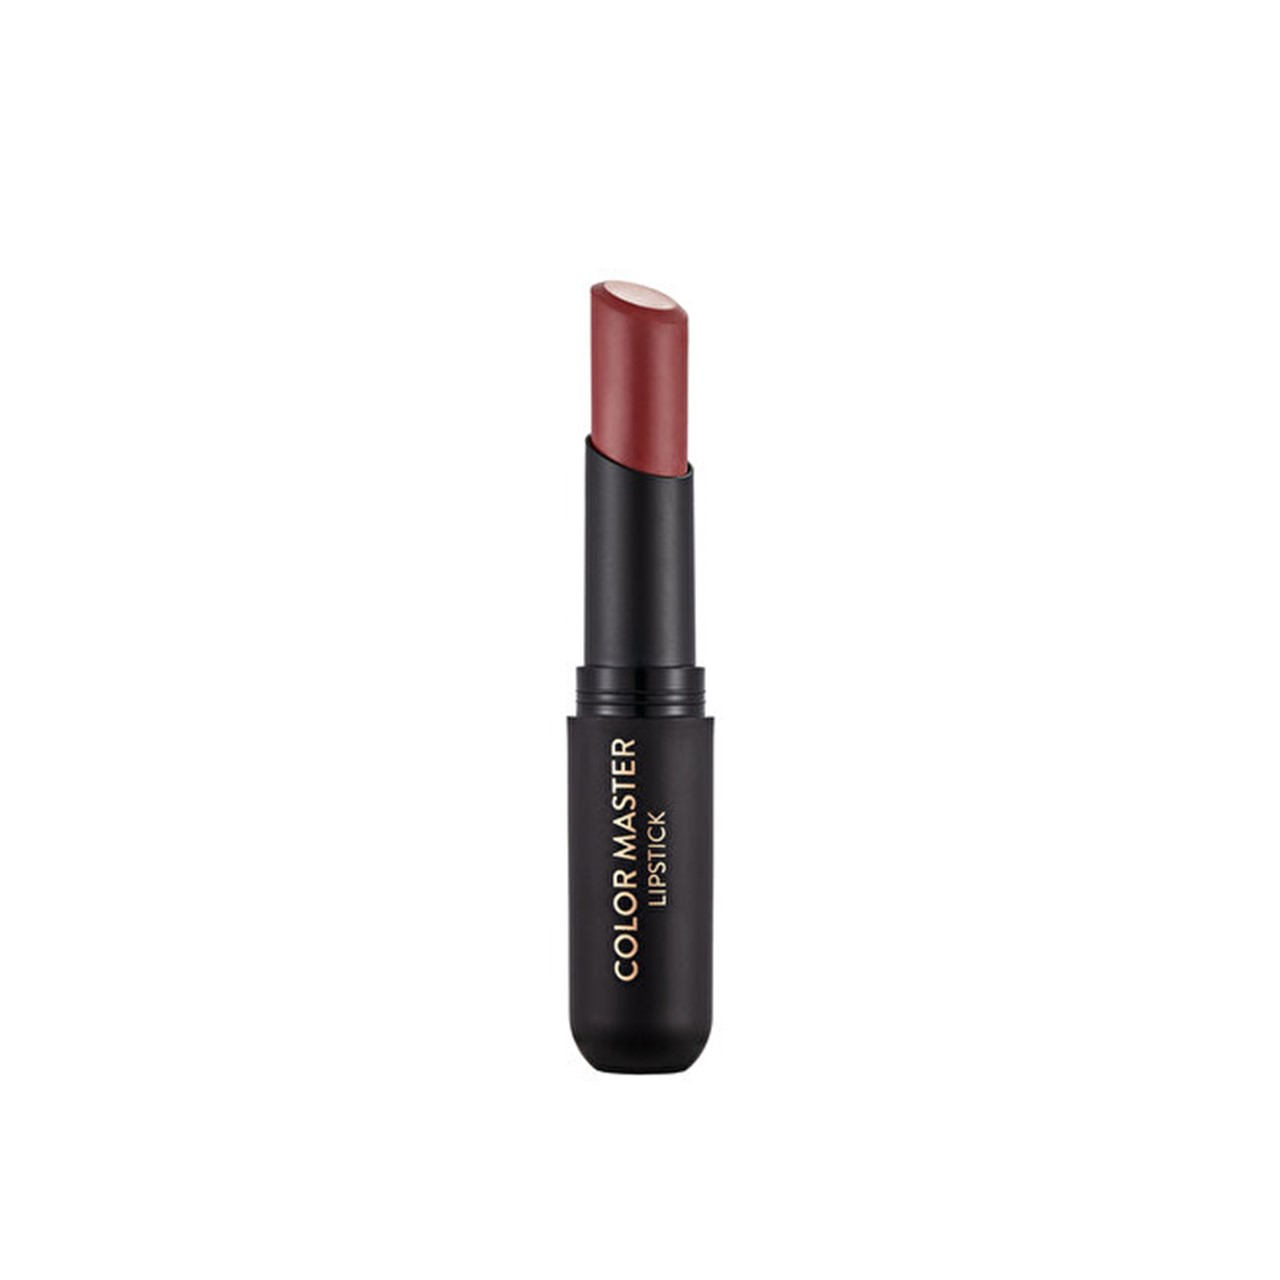 Flormar Color Master Lipstick 06 Berries On Lips 3g